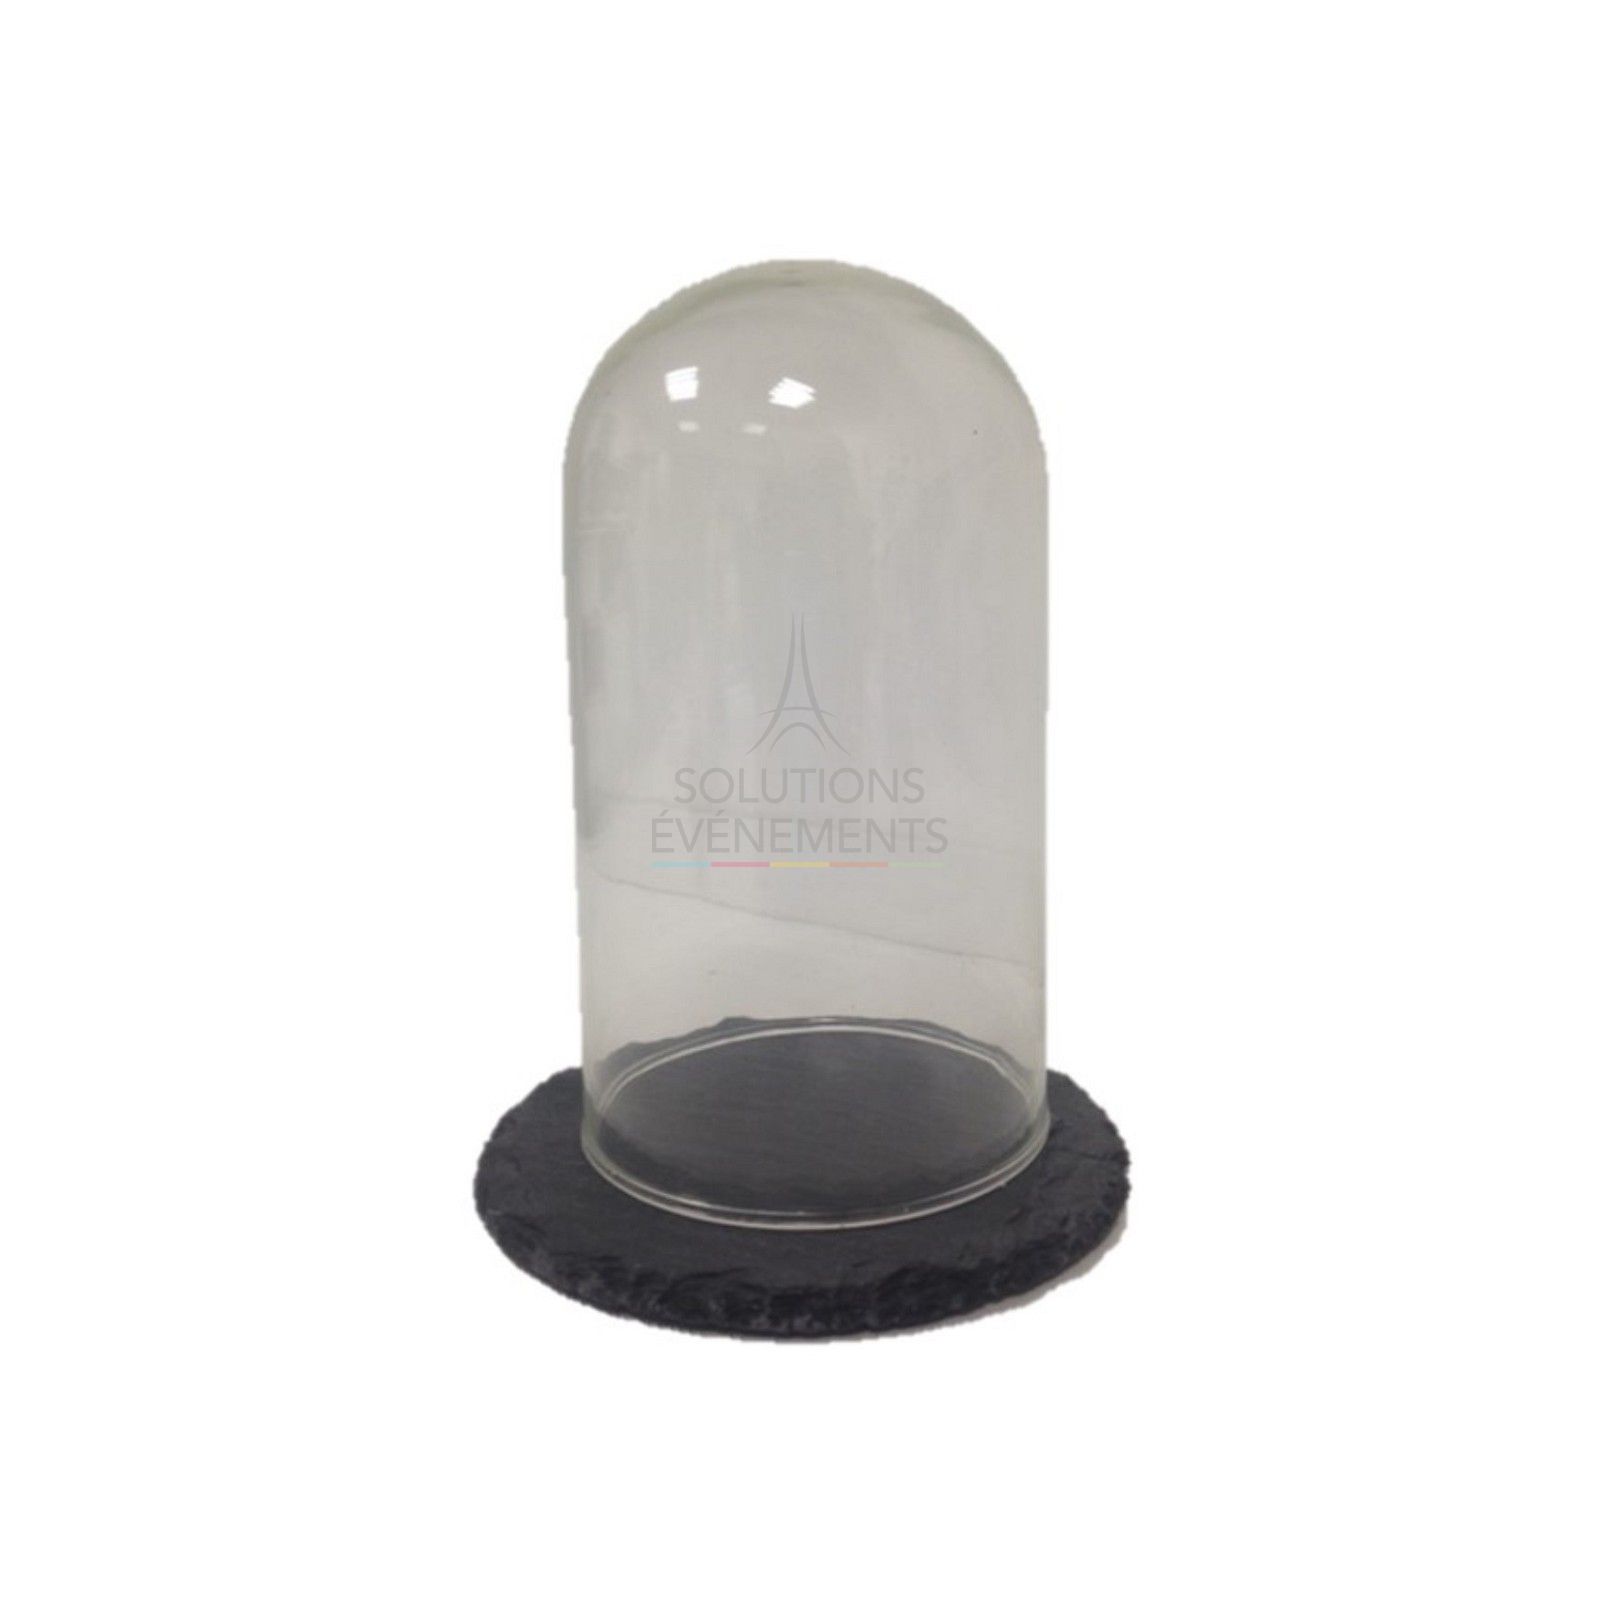 Glass bell rental, slate base to display your products.